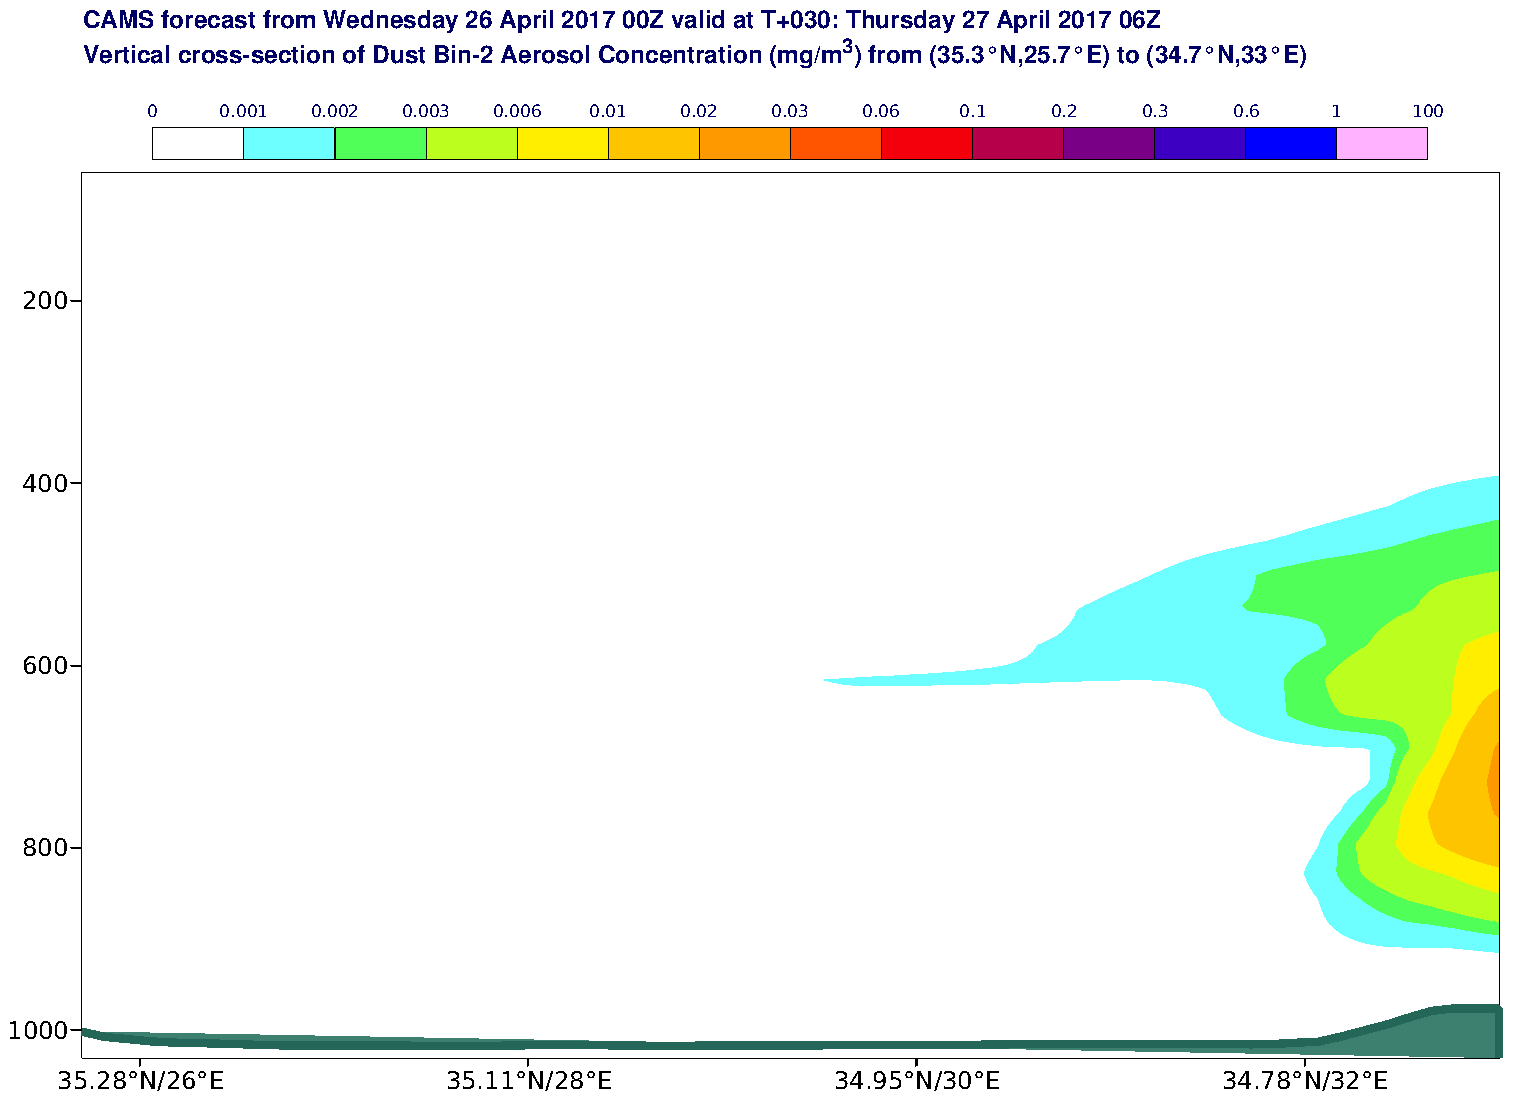 Vertical cross-section of Dust Bin-2 Aerosol Concentration (mg/m3) valid at T30 - 2017-04-27 06:00